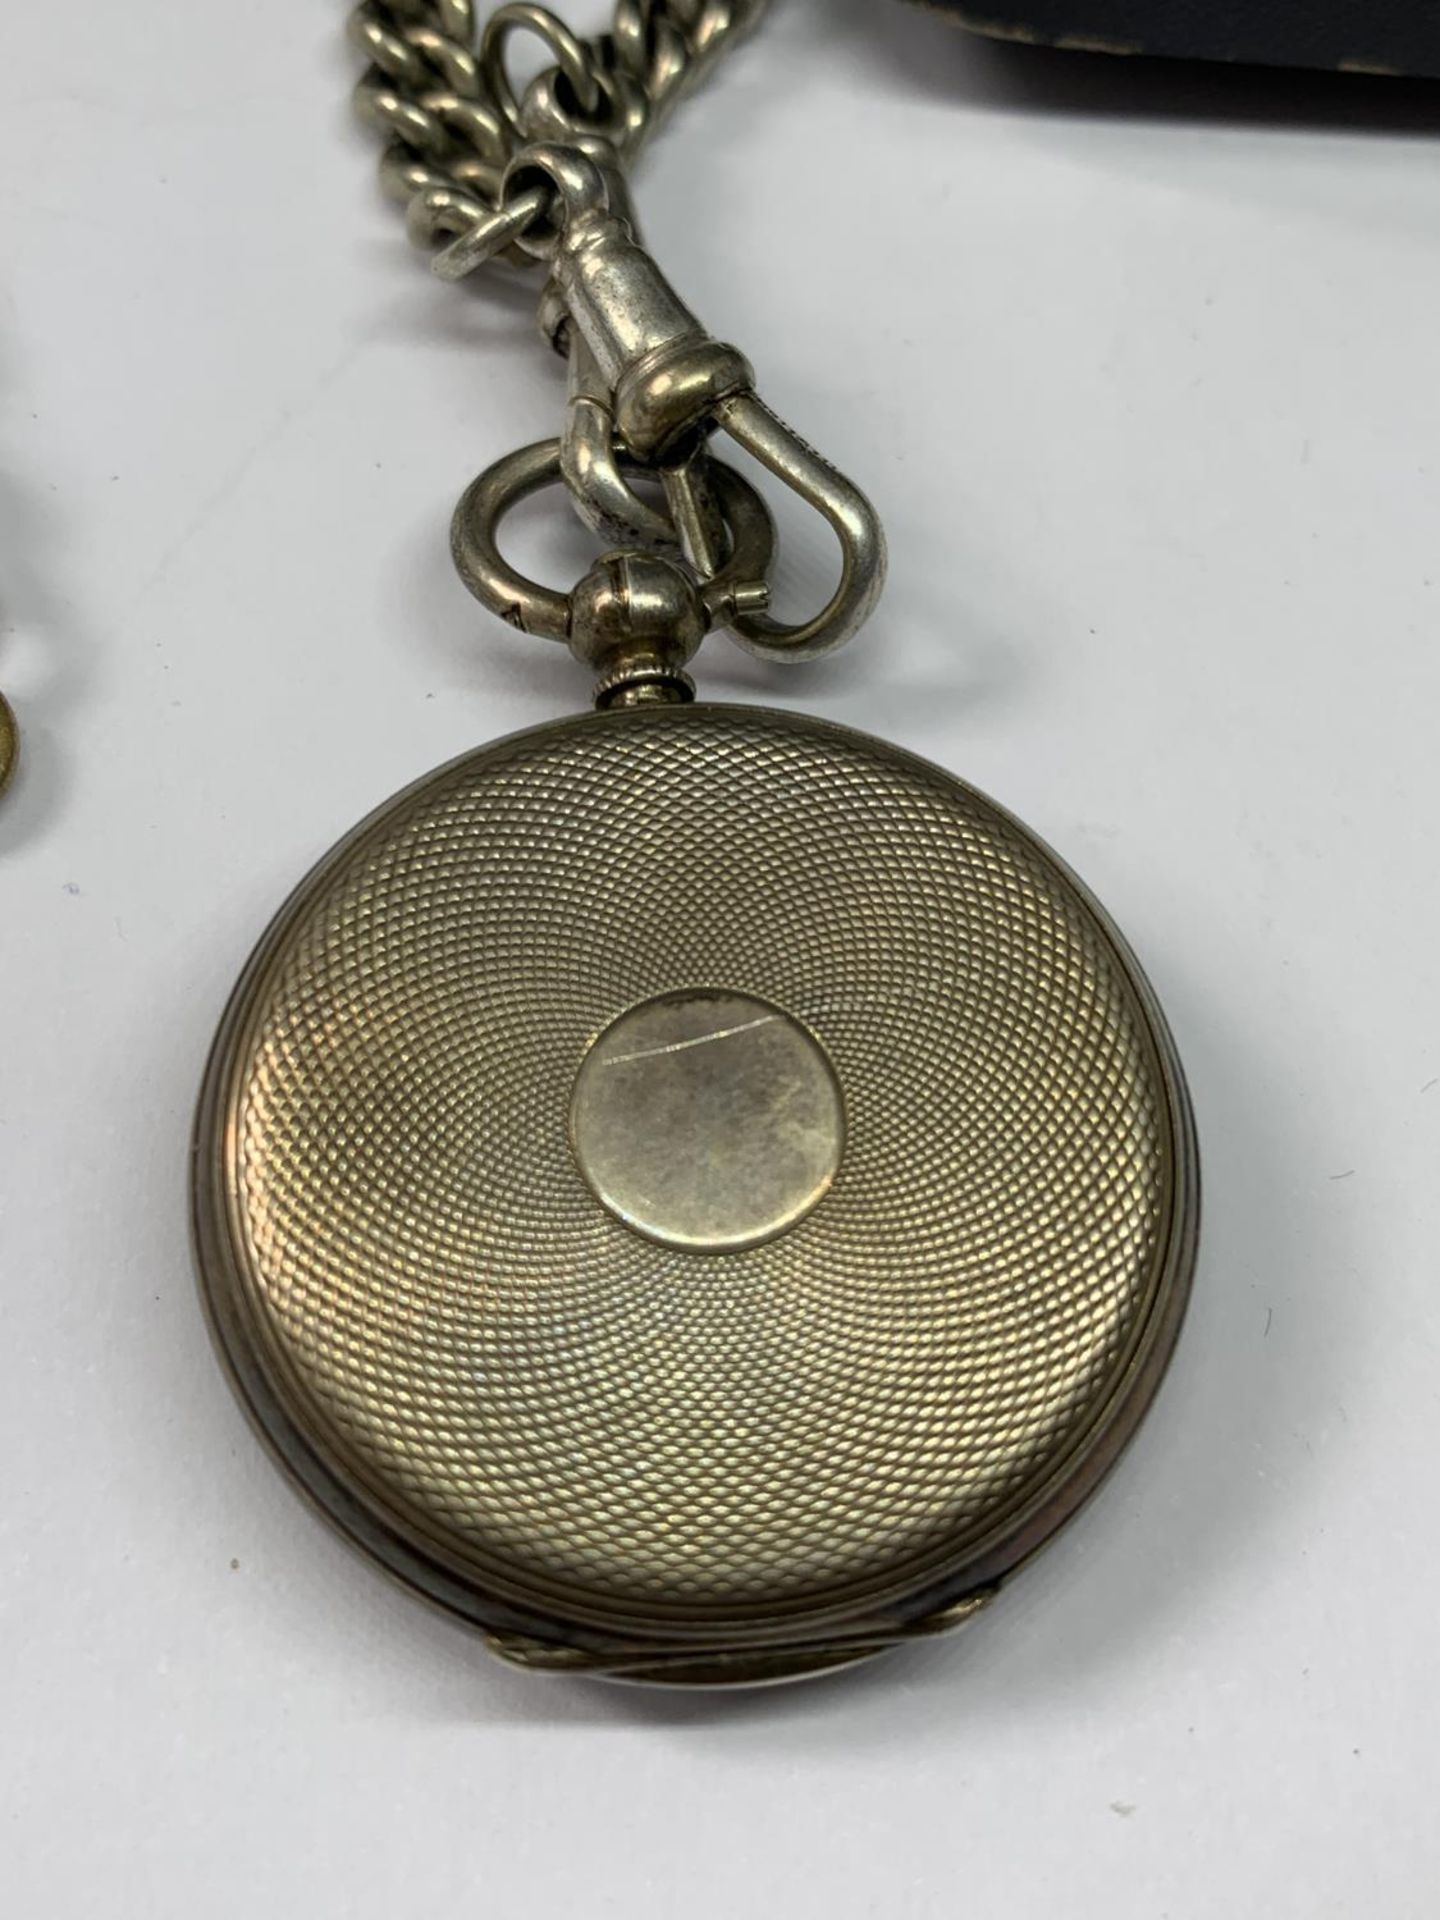 A SILVER POCKET WATCH WITH ALBERT CHAIN AND KEY IN A PRESENTATION BOX - Image 3 of 6